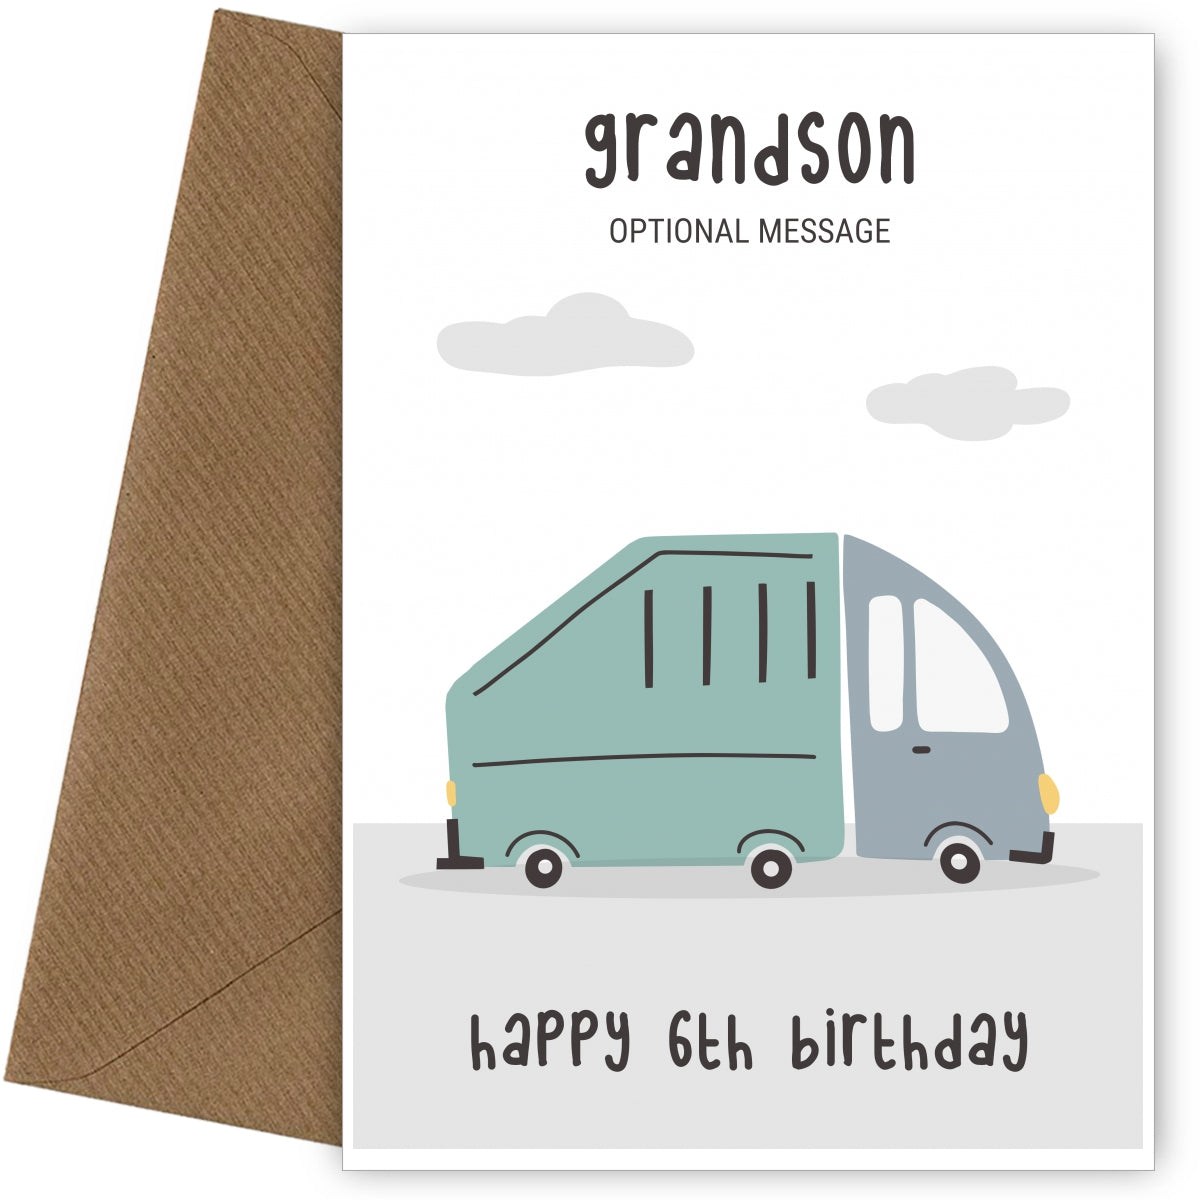 Fun Vehicles 6th Birthday Card for Grandson - Garbage Truck